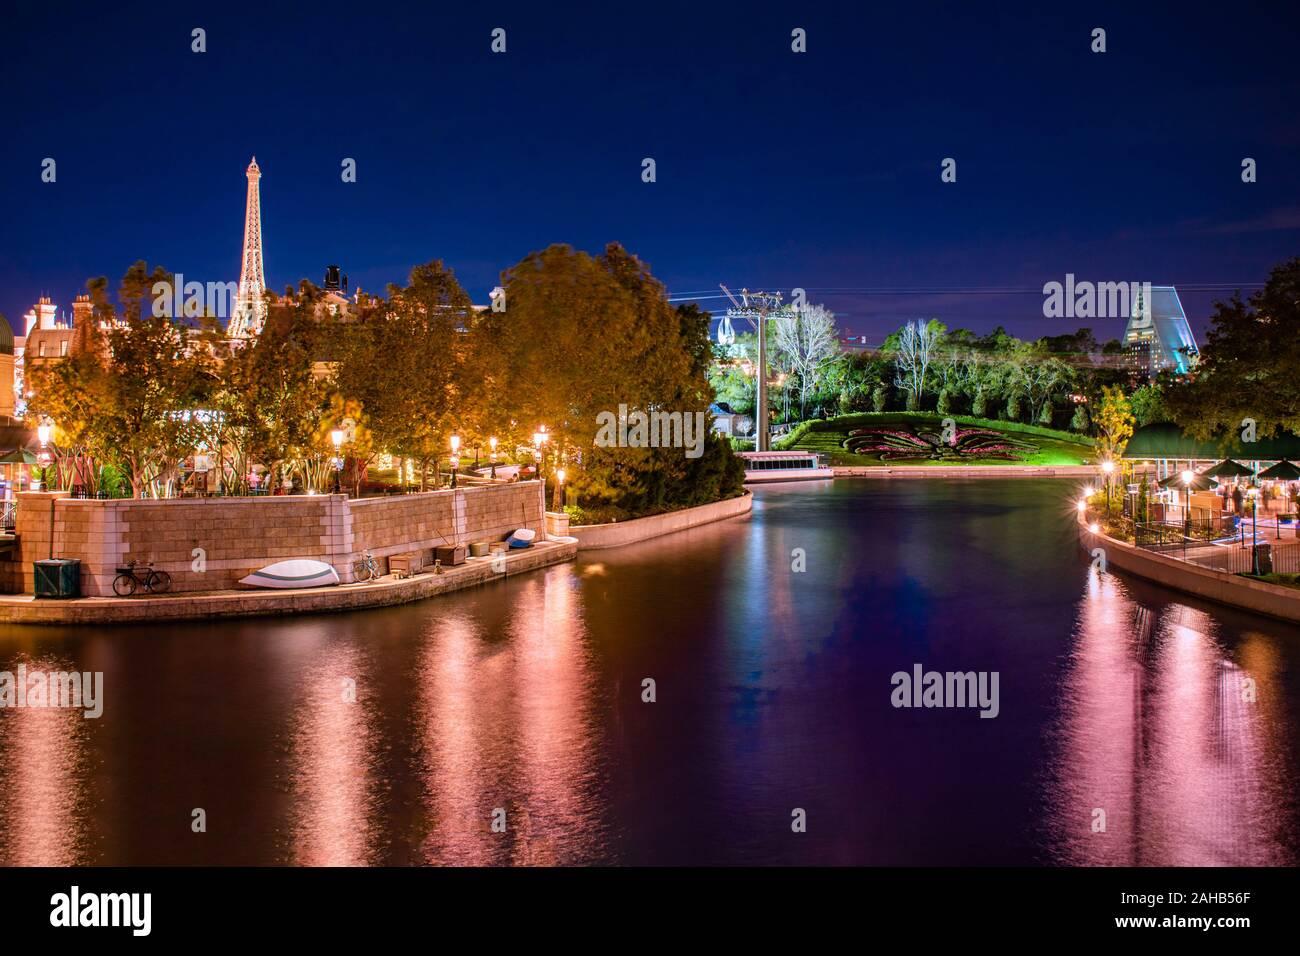 Orlando, Florida. December 18, 2019. Beautiful view of France Pavillion and canal at Epcot (18) Stock Photo